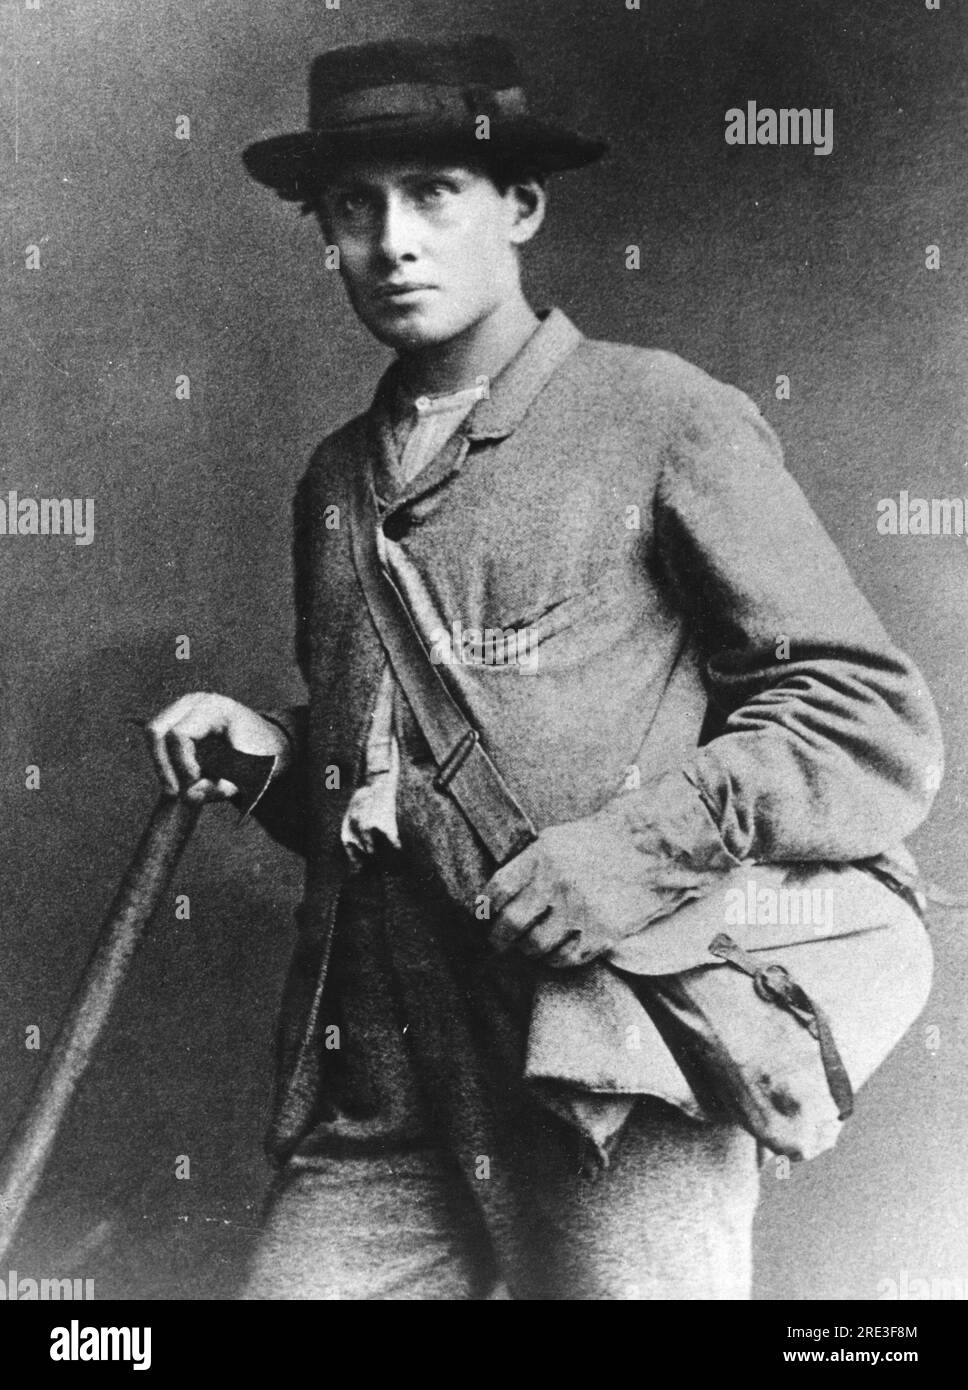 Whymper, Edward, 27.4.1840 - 16.9.1911, English mountaineer, with mountaineering equipment, ADDITIONAL-RIGHTS-CLEARANCE-INFO-NOT-AVAILABLE Stock Photo